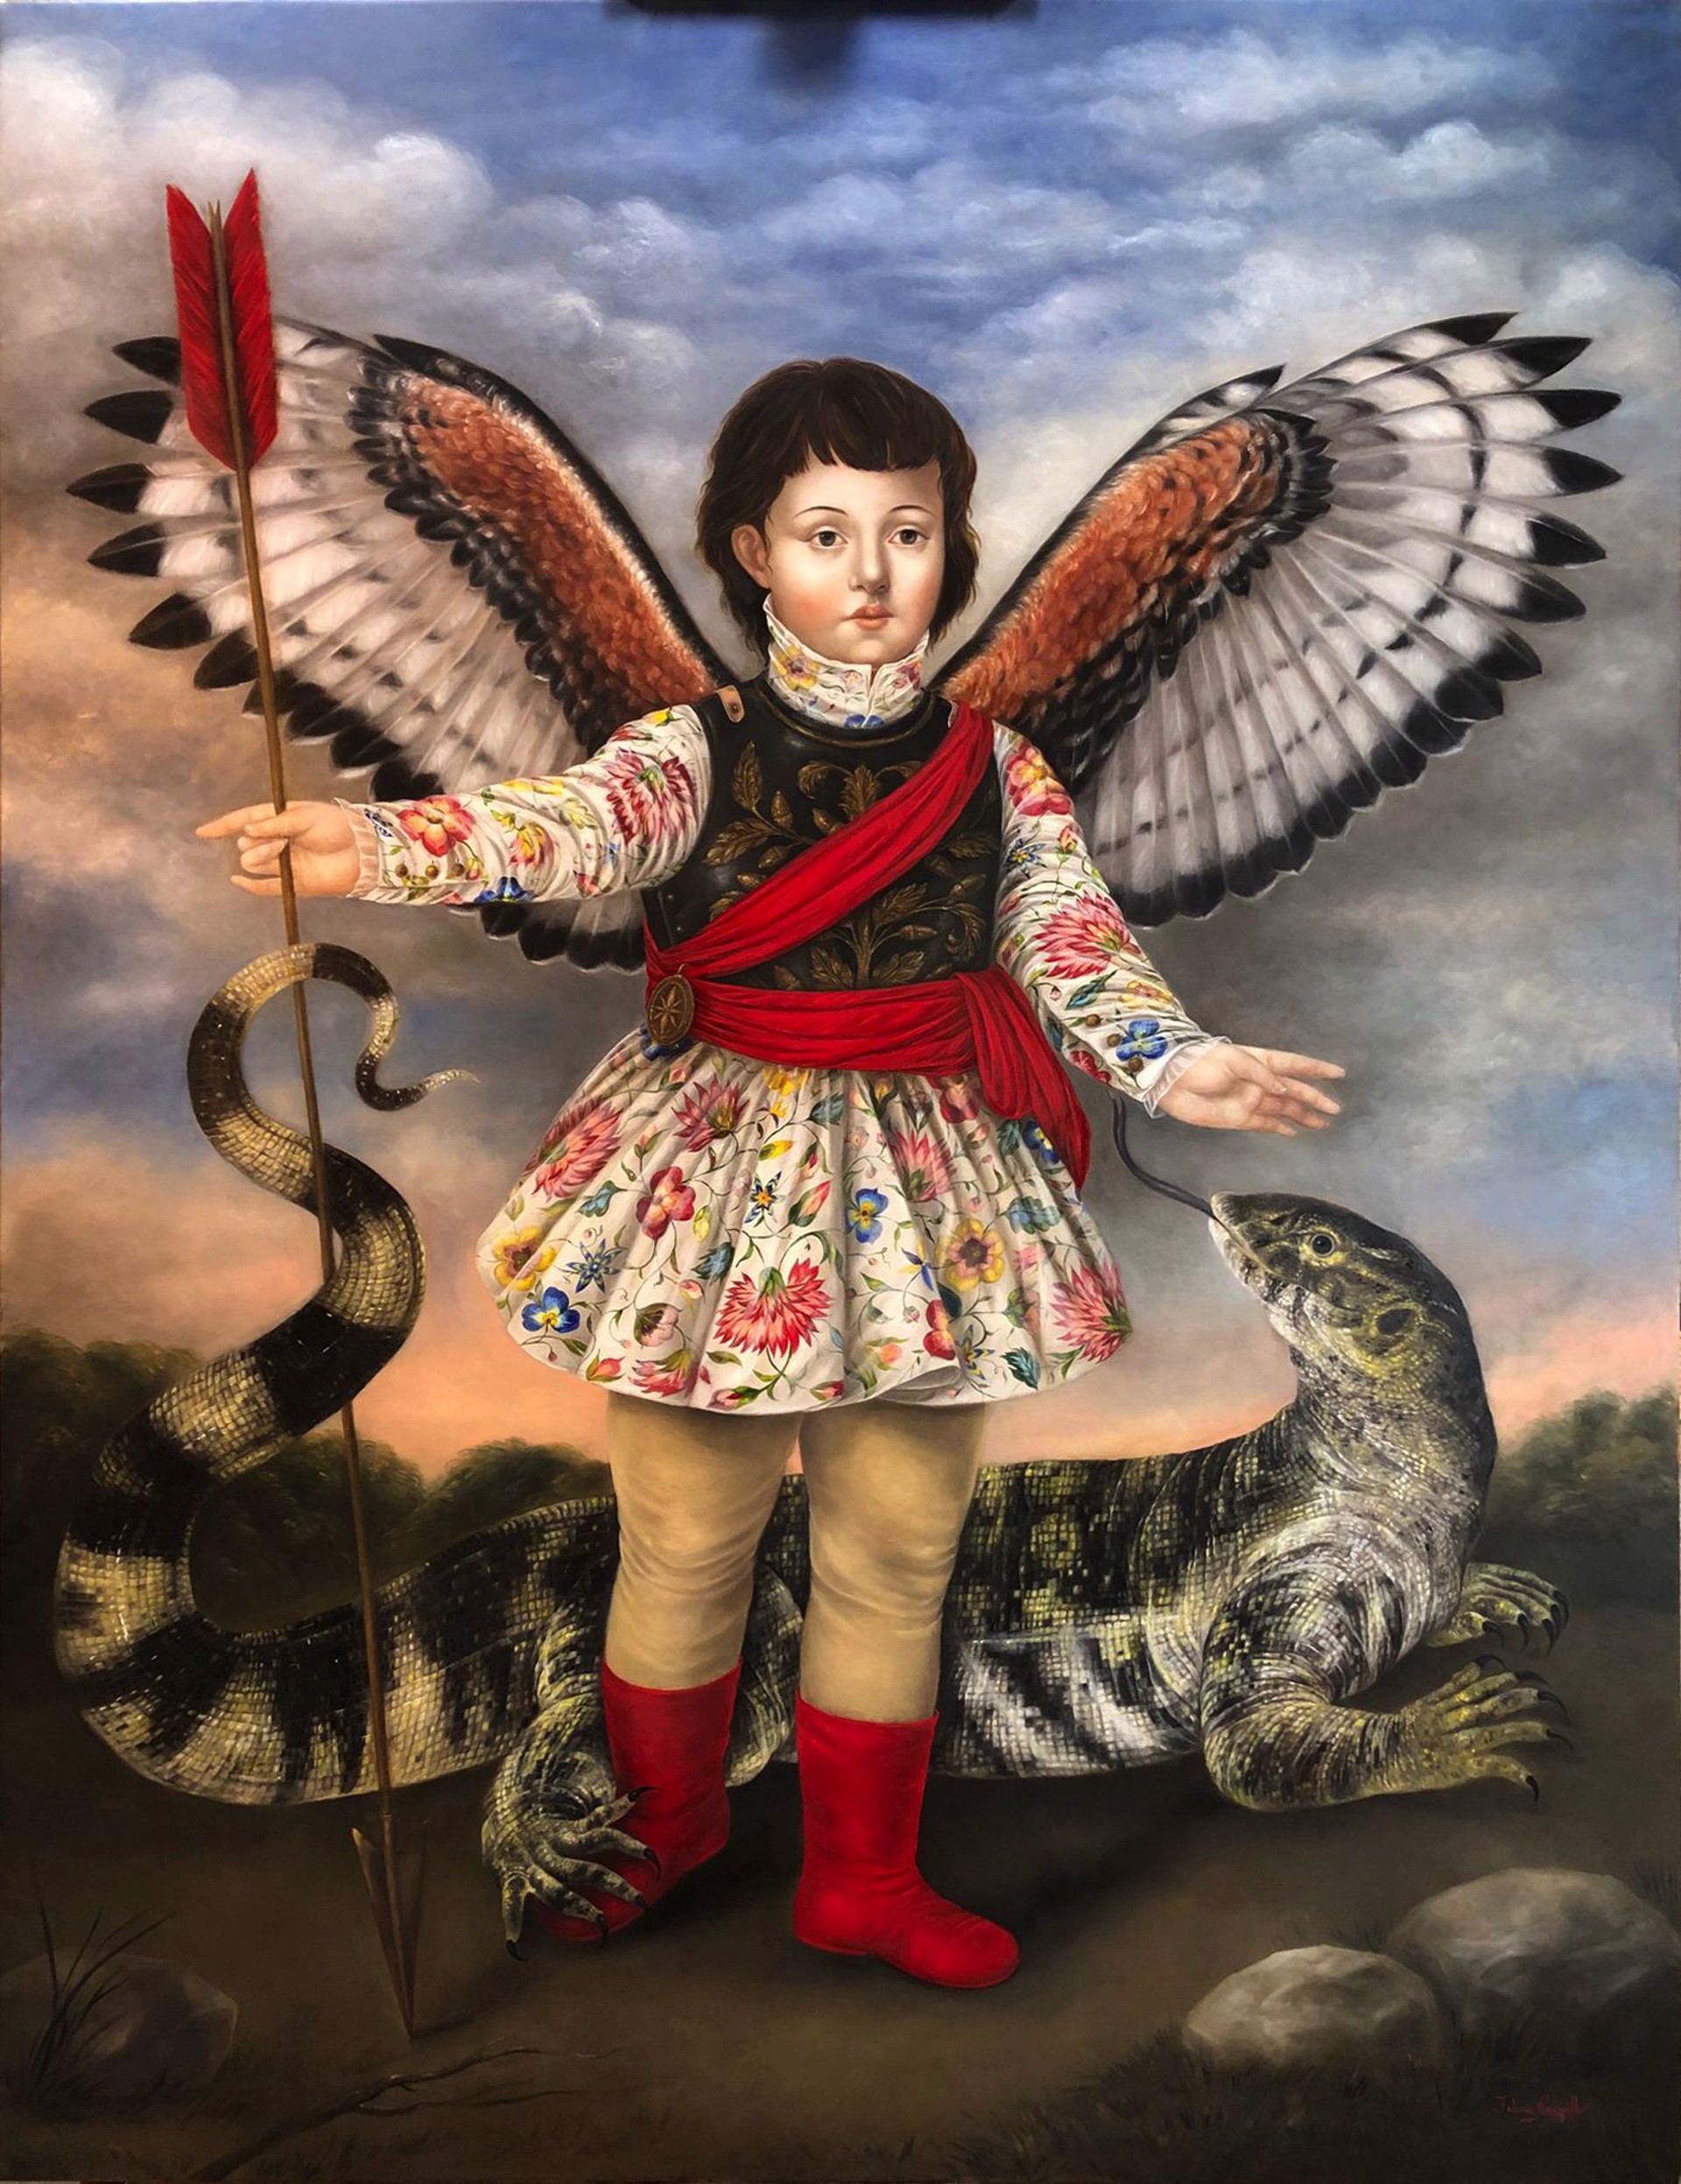 Archangel with Nile Monitor Lizard by Fatima Ronquillo